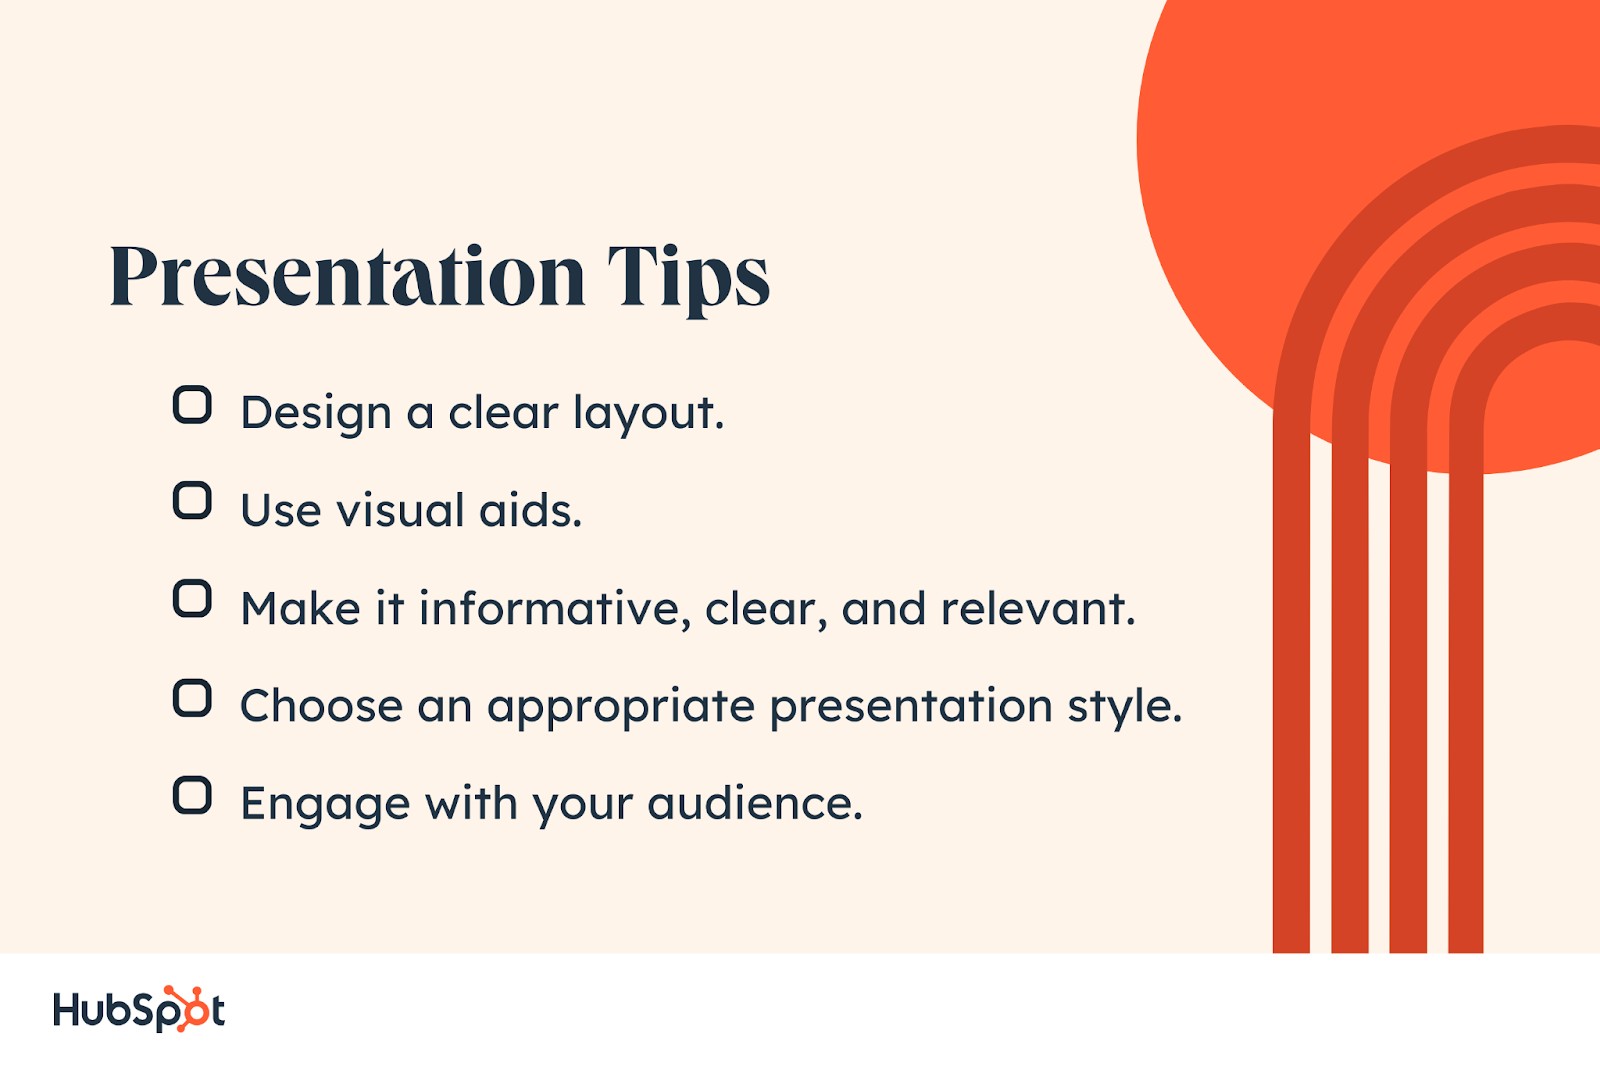 Presentation Tips. Make it informative, clear, and relevant. Design a clear layout. Choose an appropriate presentation style. Use visual aids. Engage with your audience.